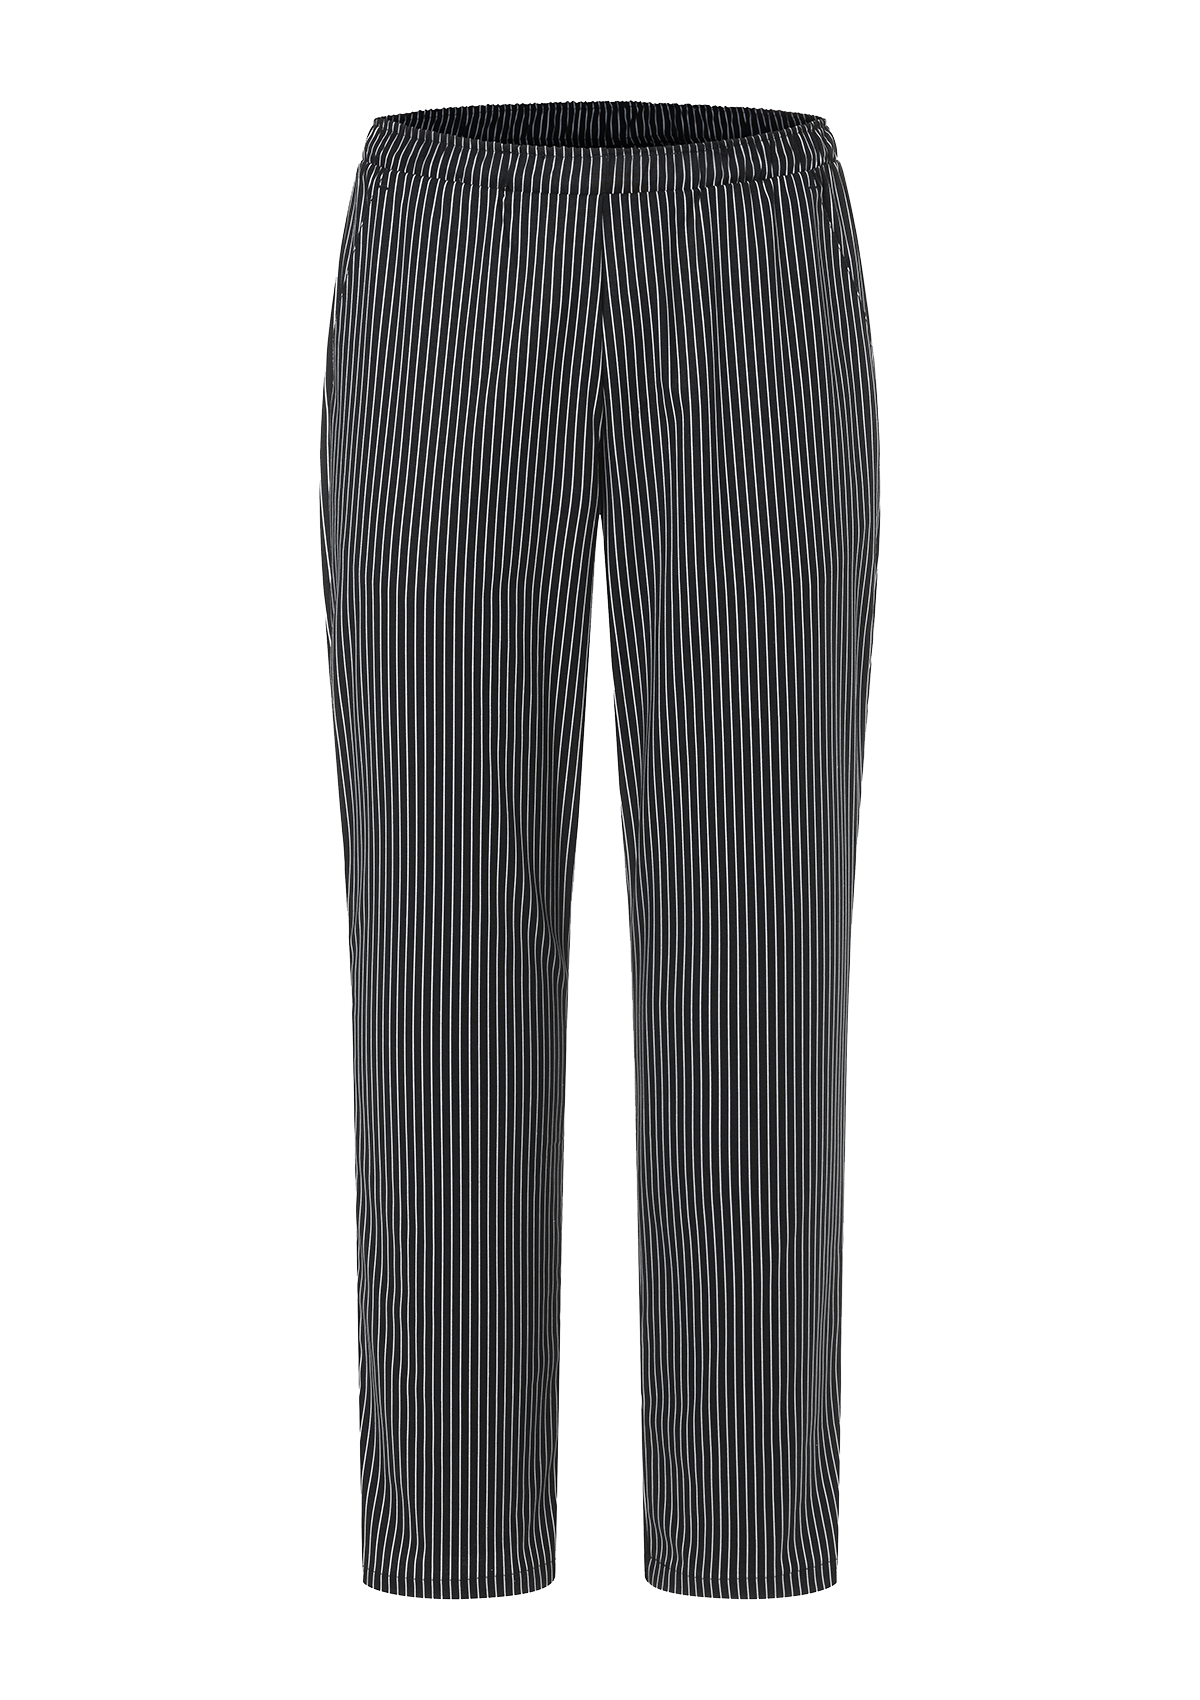 Chef's Pull-On Trousers Carlo for Men